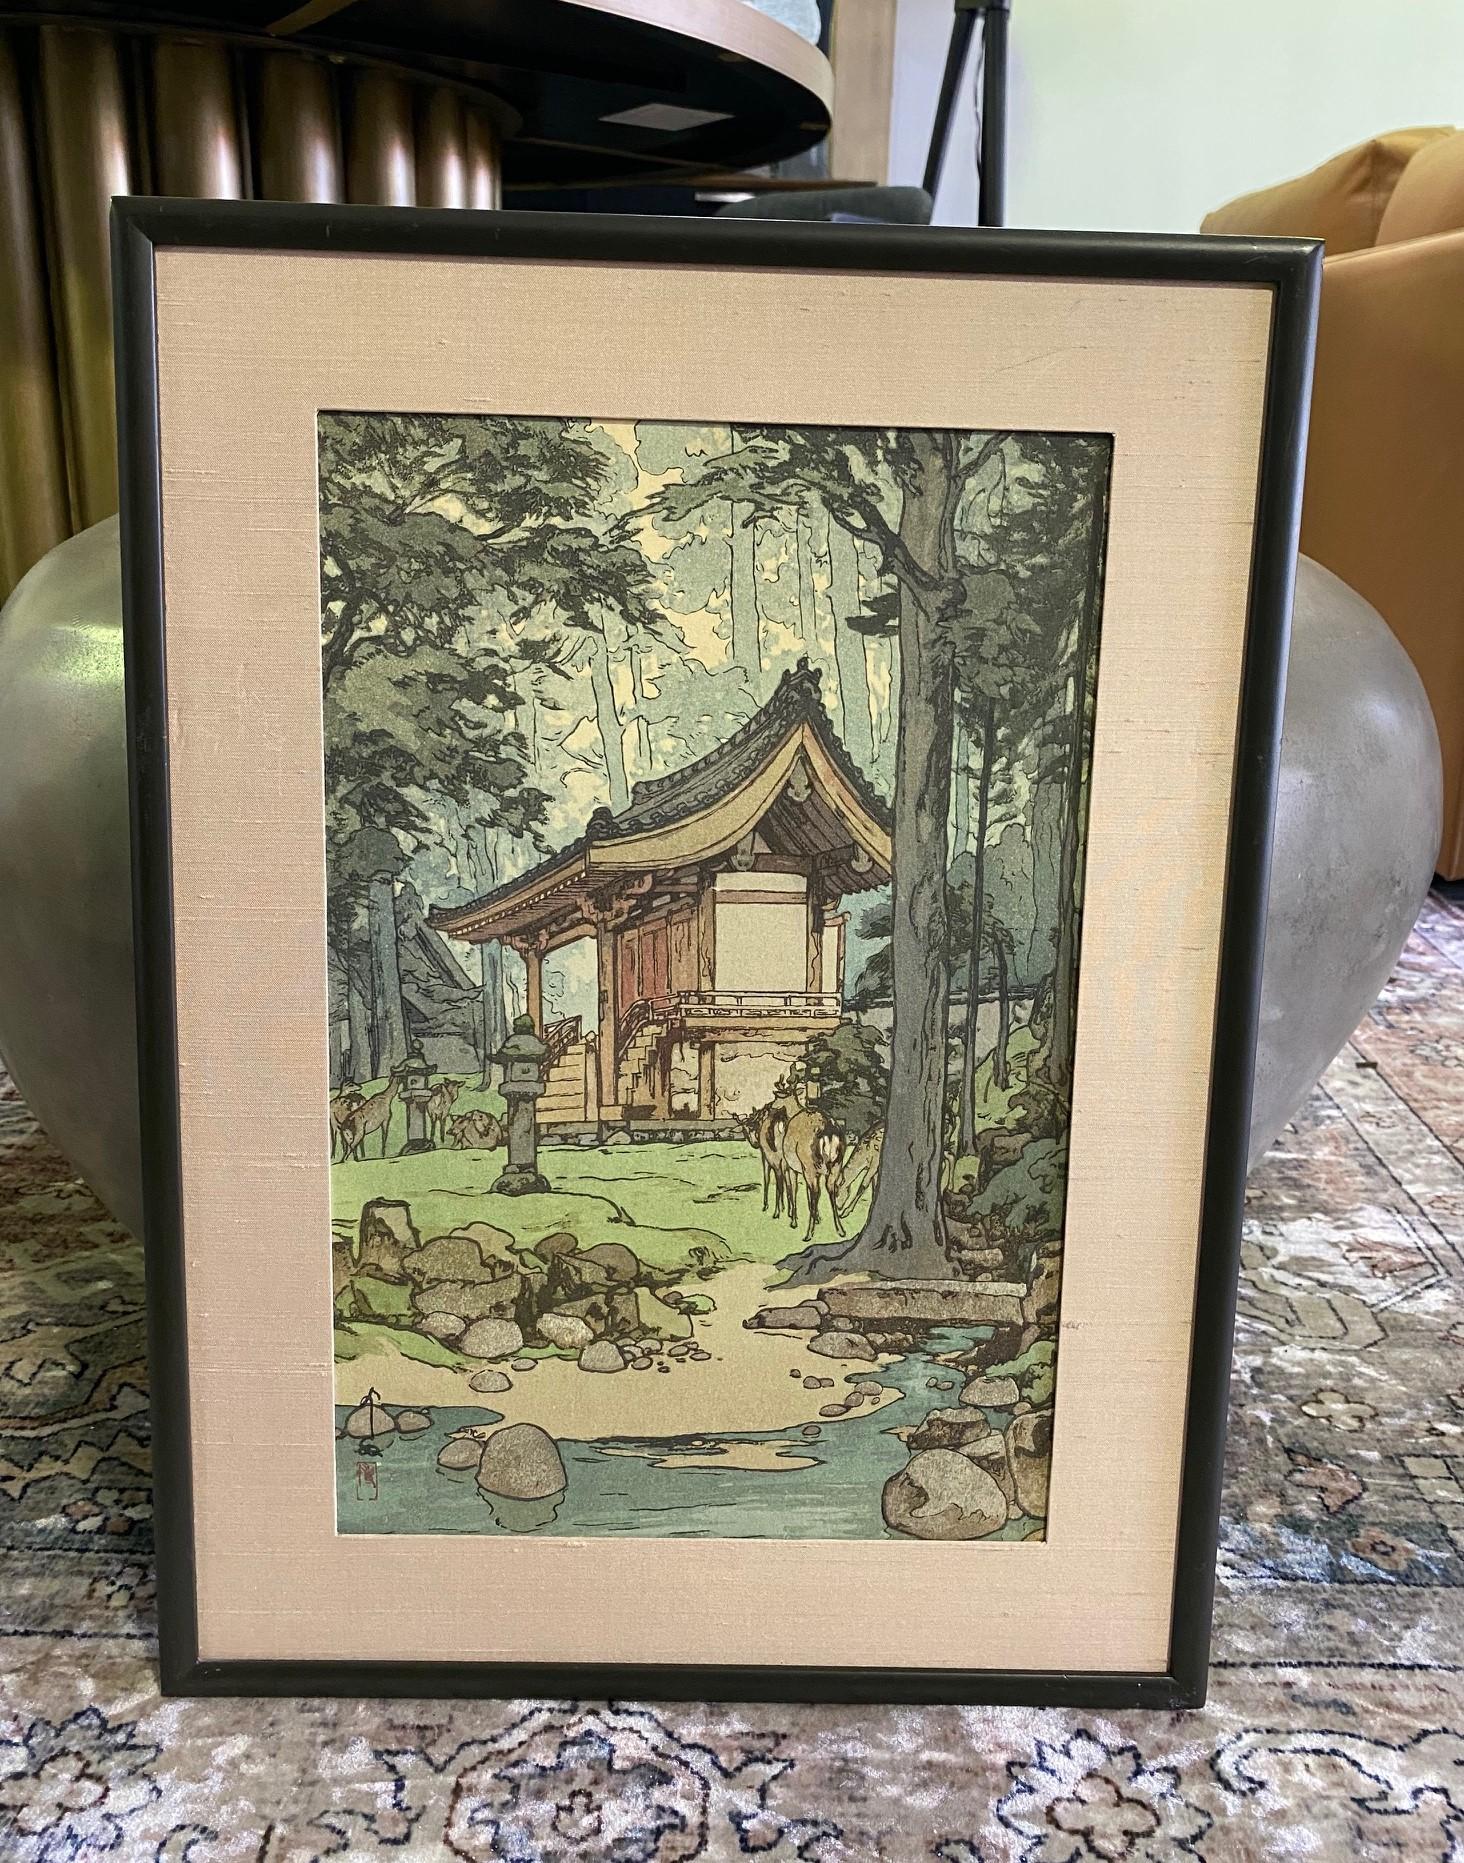 This wonderful image of a Japanese temple deep in a luscious, green forest with playful deer is titled 